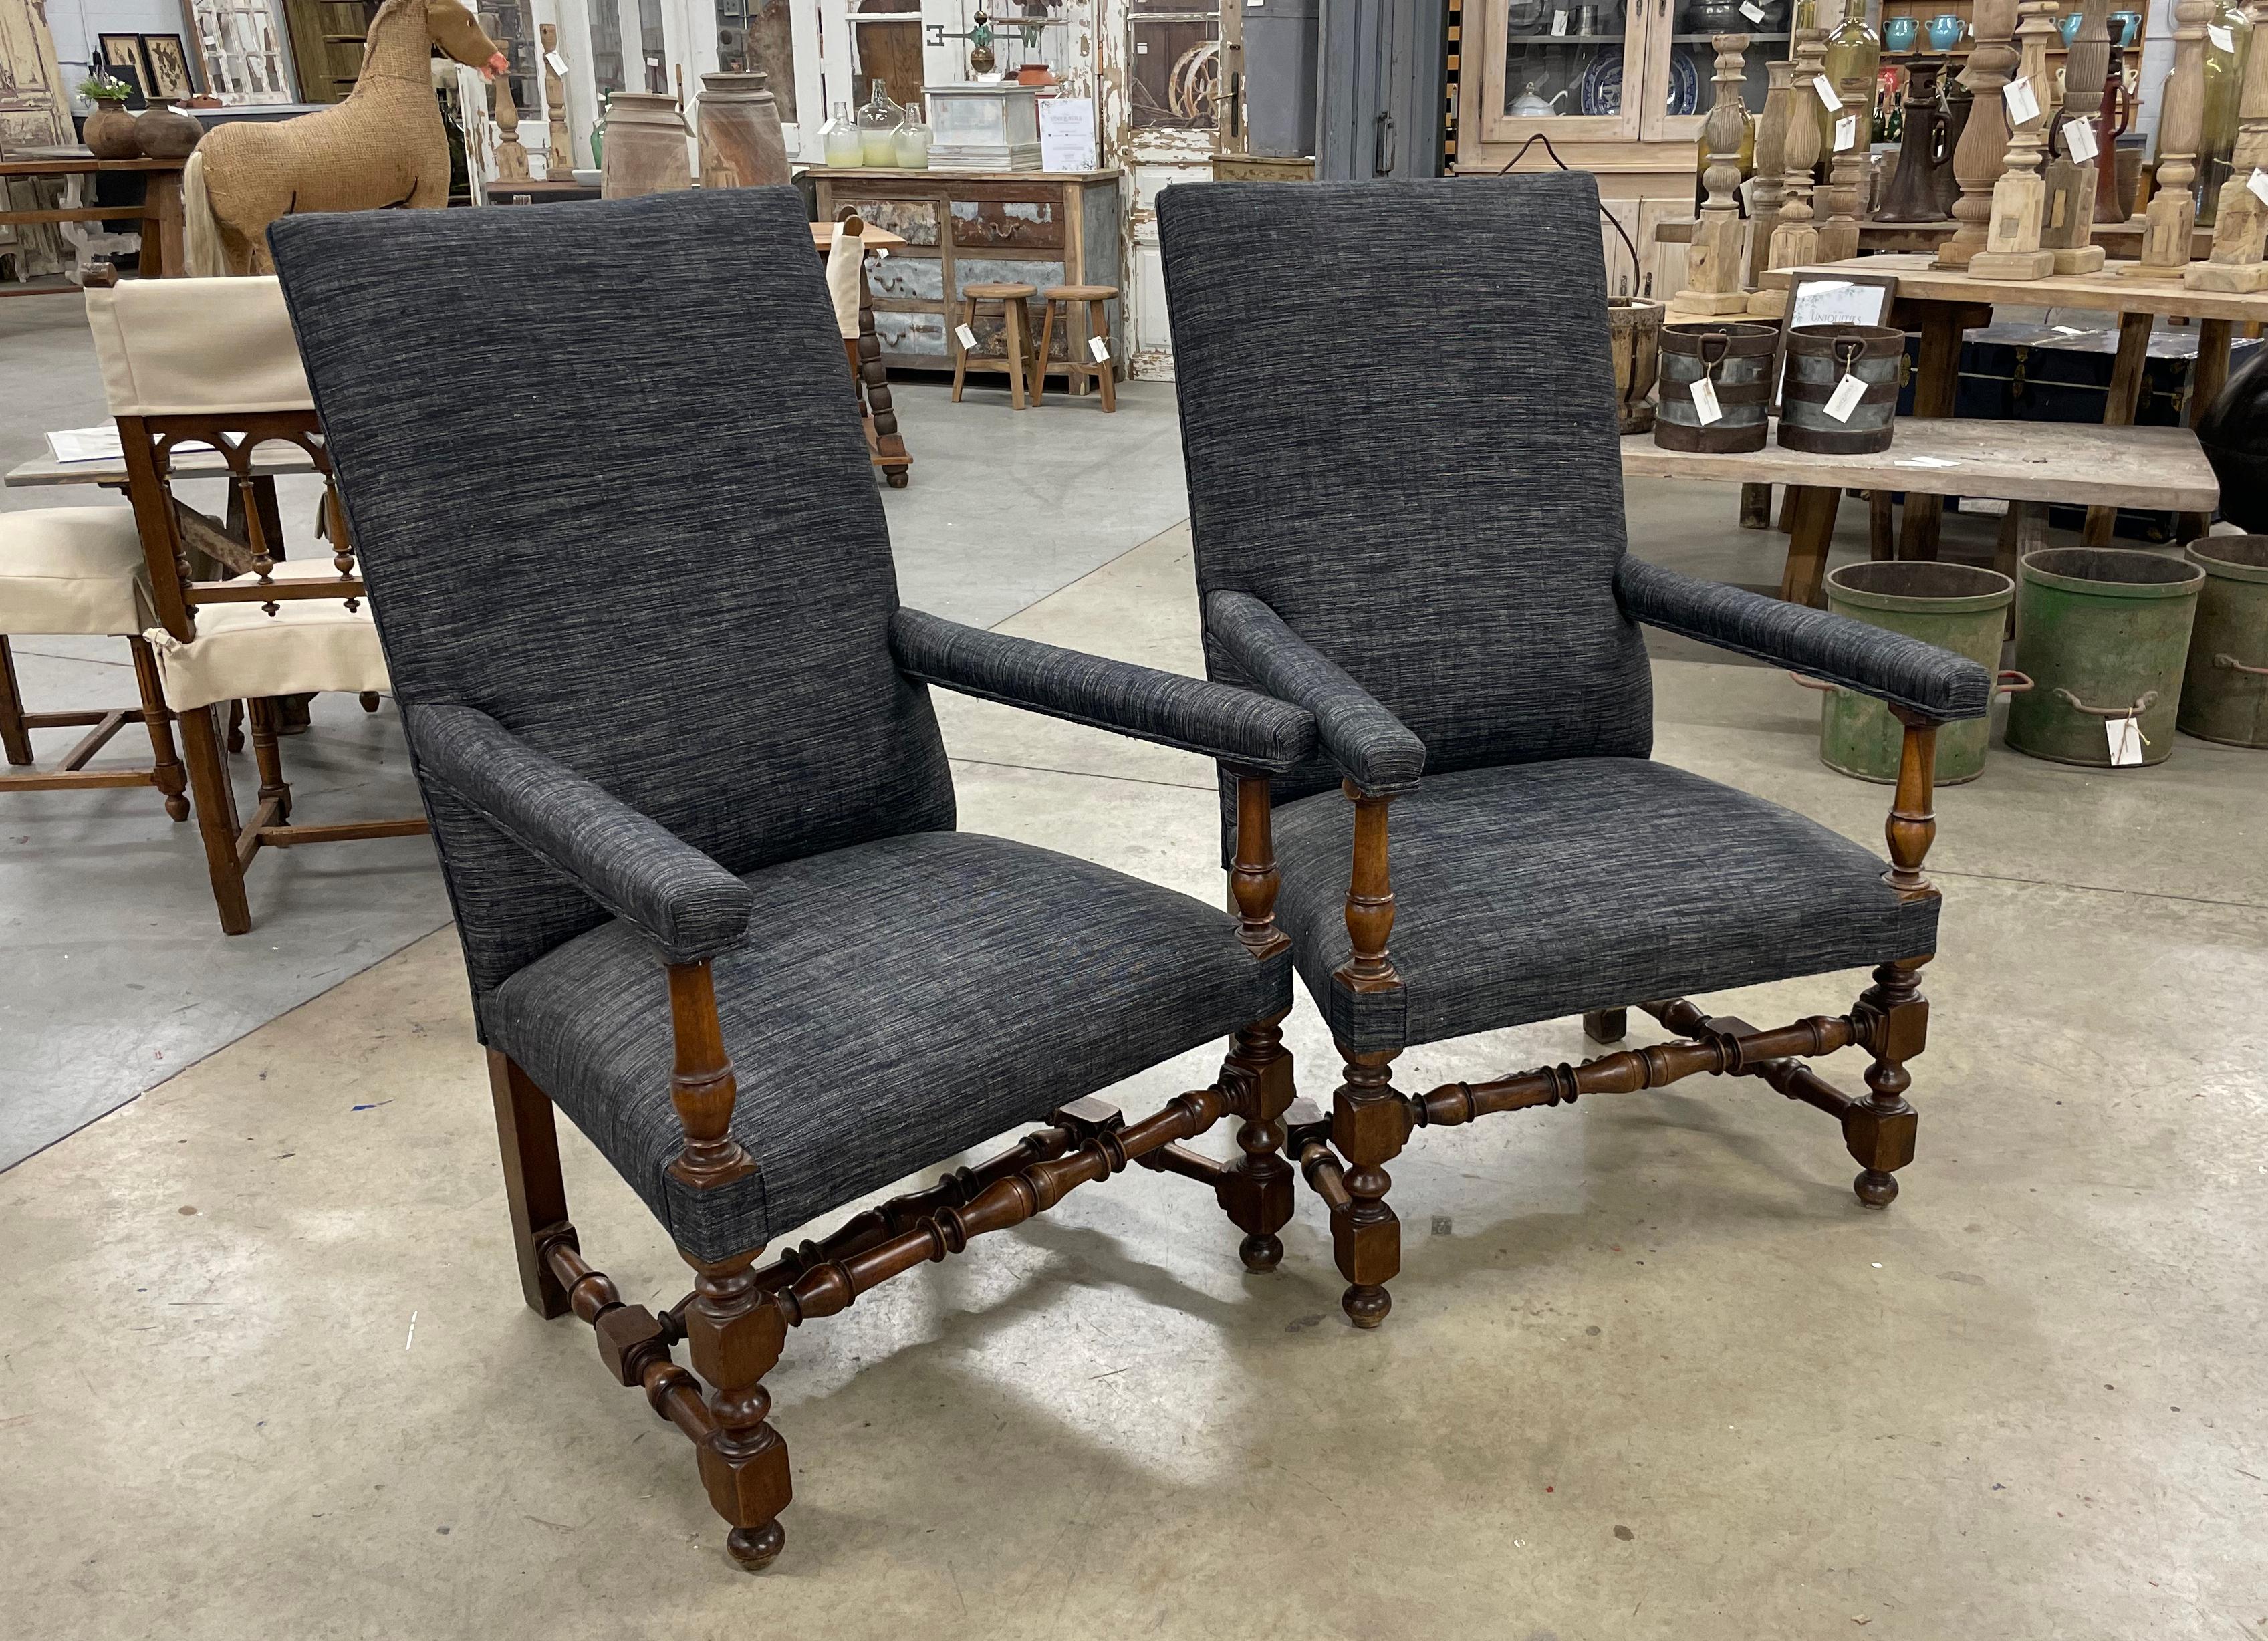 Substantial pair of 19th century Louis XIII style carved walnut French fauteuil armchairs. The chairs have block and turned front legs connected by a centre turned stretcher with turned sides that connect to straight back legs.

The chairs are